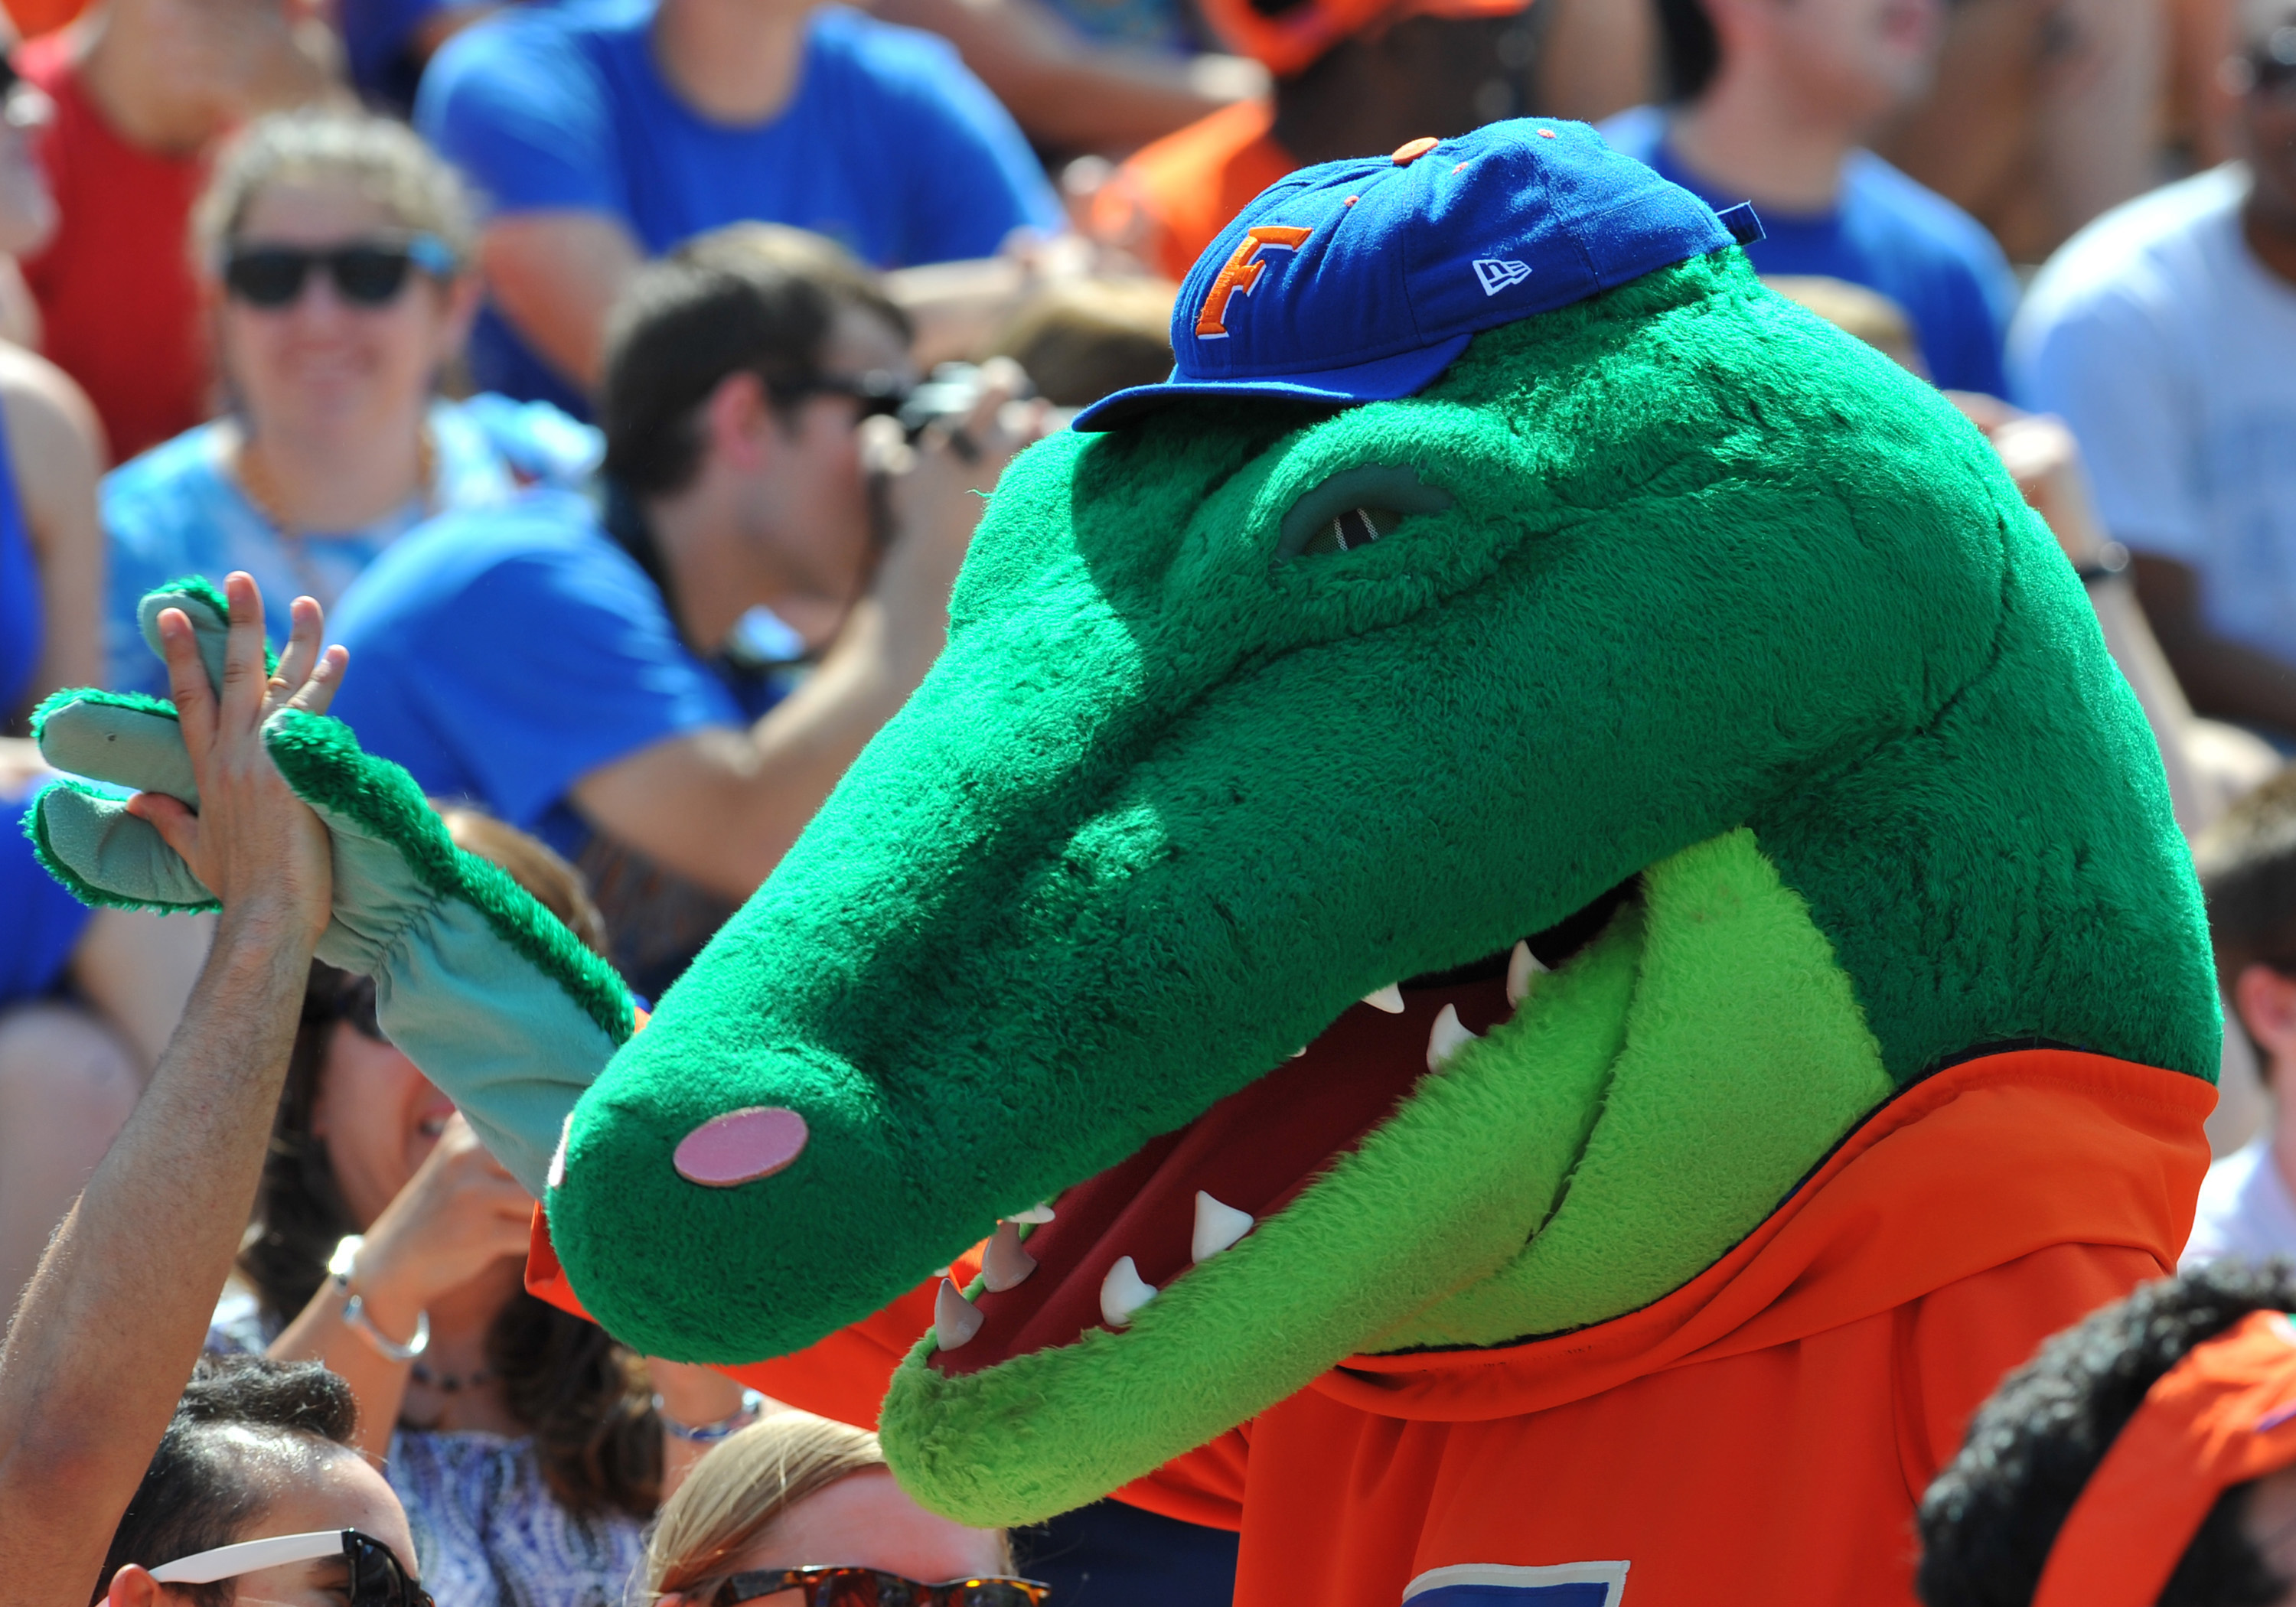 GAINESVILLE, FL - APRIL 9: The Florida Gators mascot celebrates with fans during the Orange and Blue spring football game April 9, 2011 at Ben Hill Griffin Stadium in Gainesville, Florida.  (Photo by Al Messerschmidt/Getty Images)